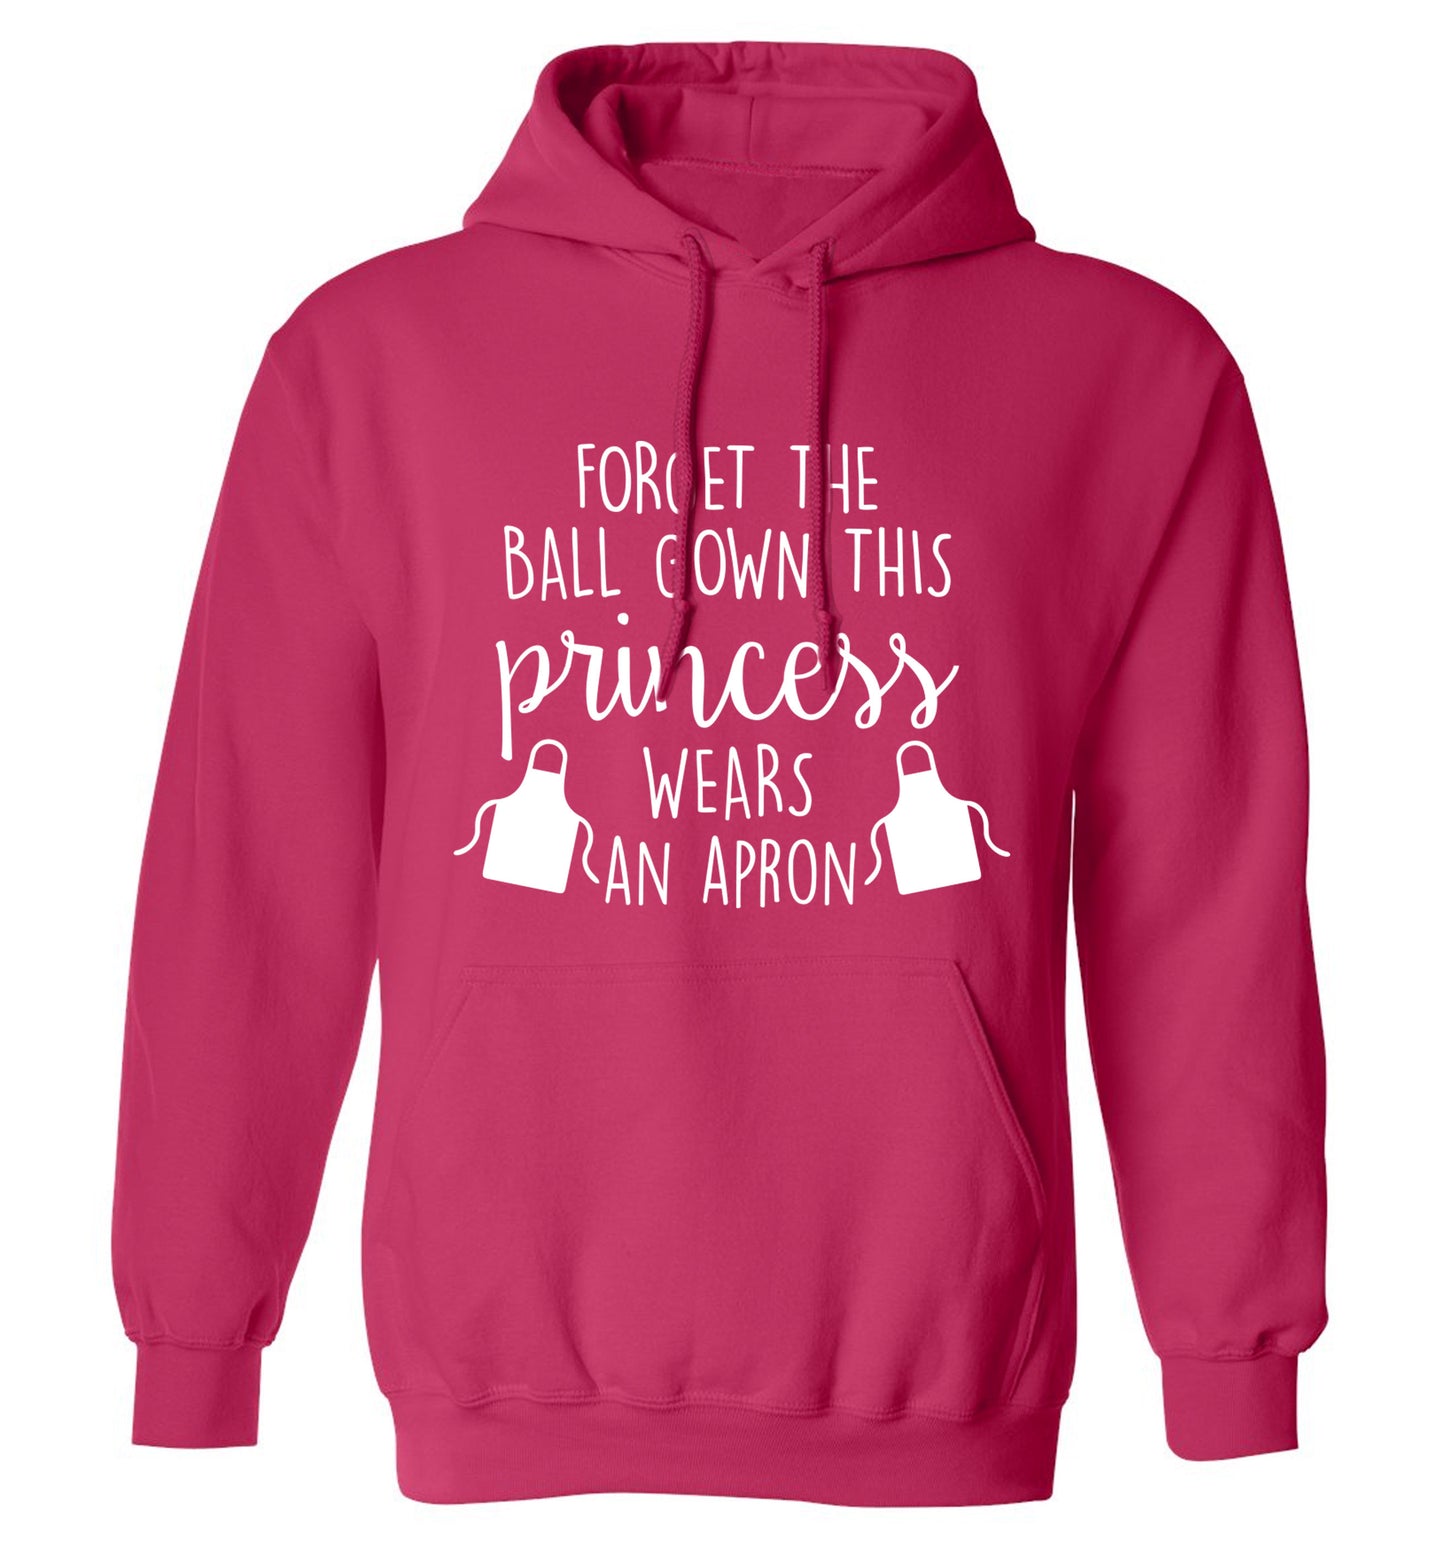 Forget the ball gown this princess wears an apron adults unisex pink hoodie 2XL